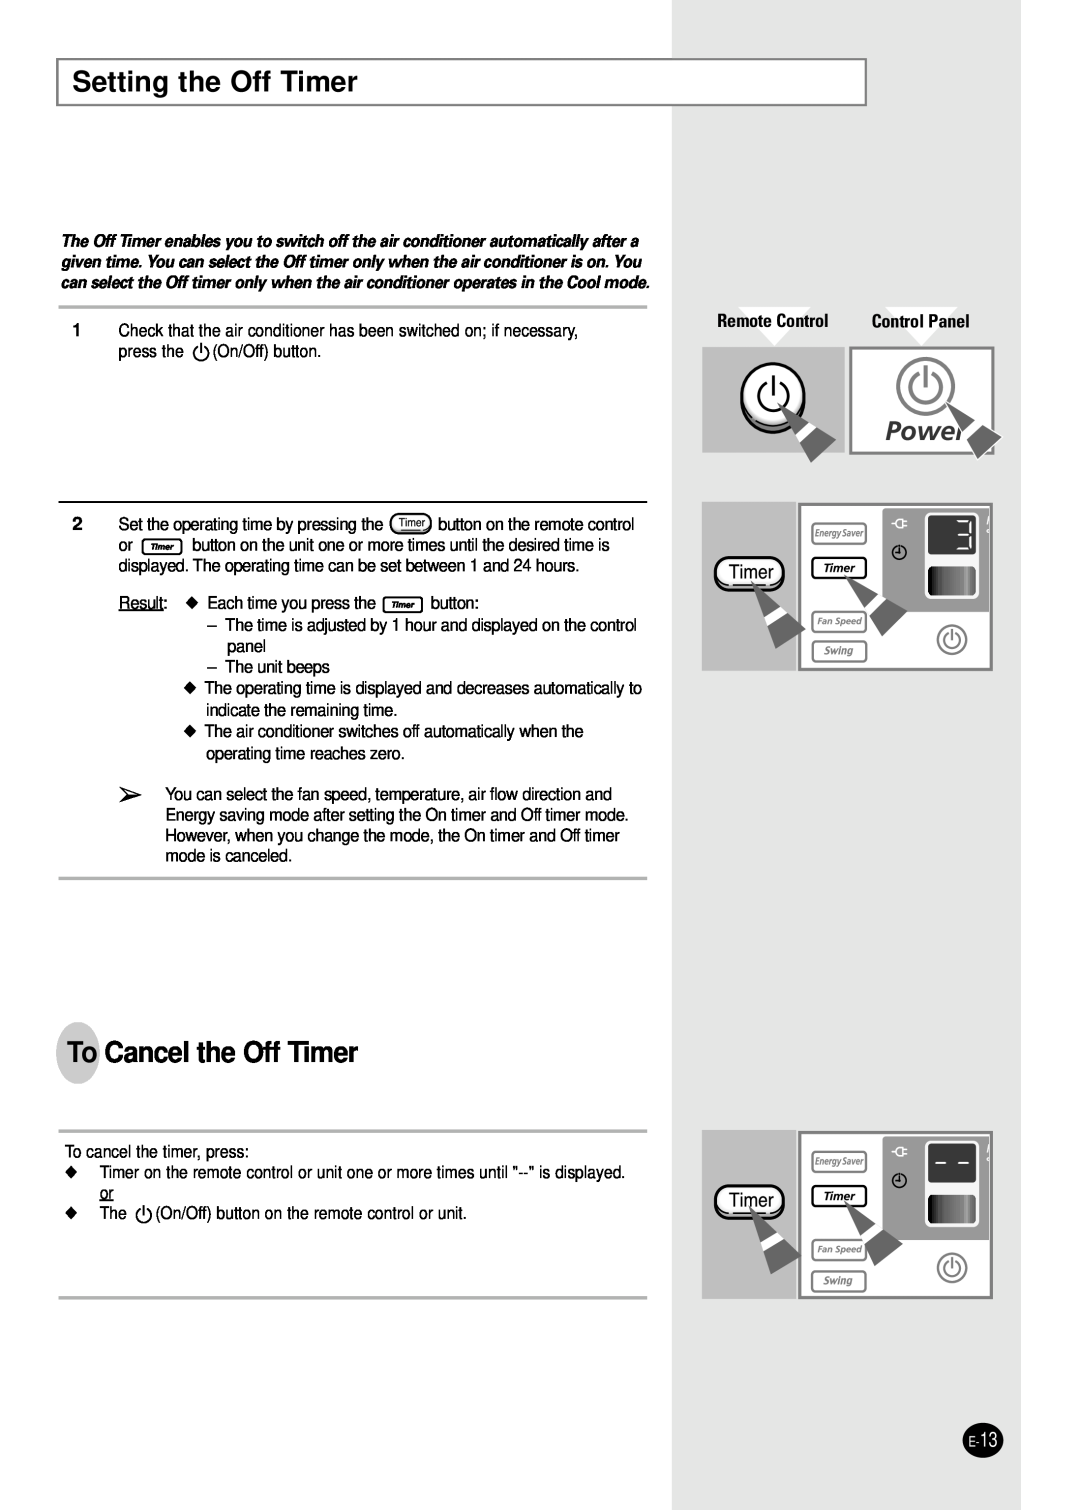 Samsung AW2400B manual Setting the Off Timer, To Cancel the Off Timer, Control Panel, Remote Control 